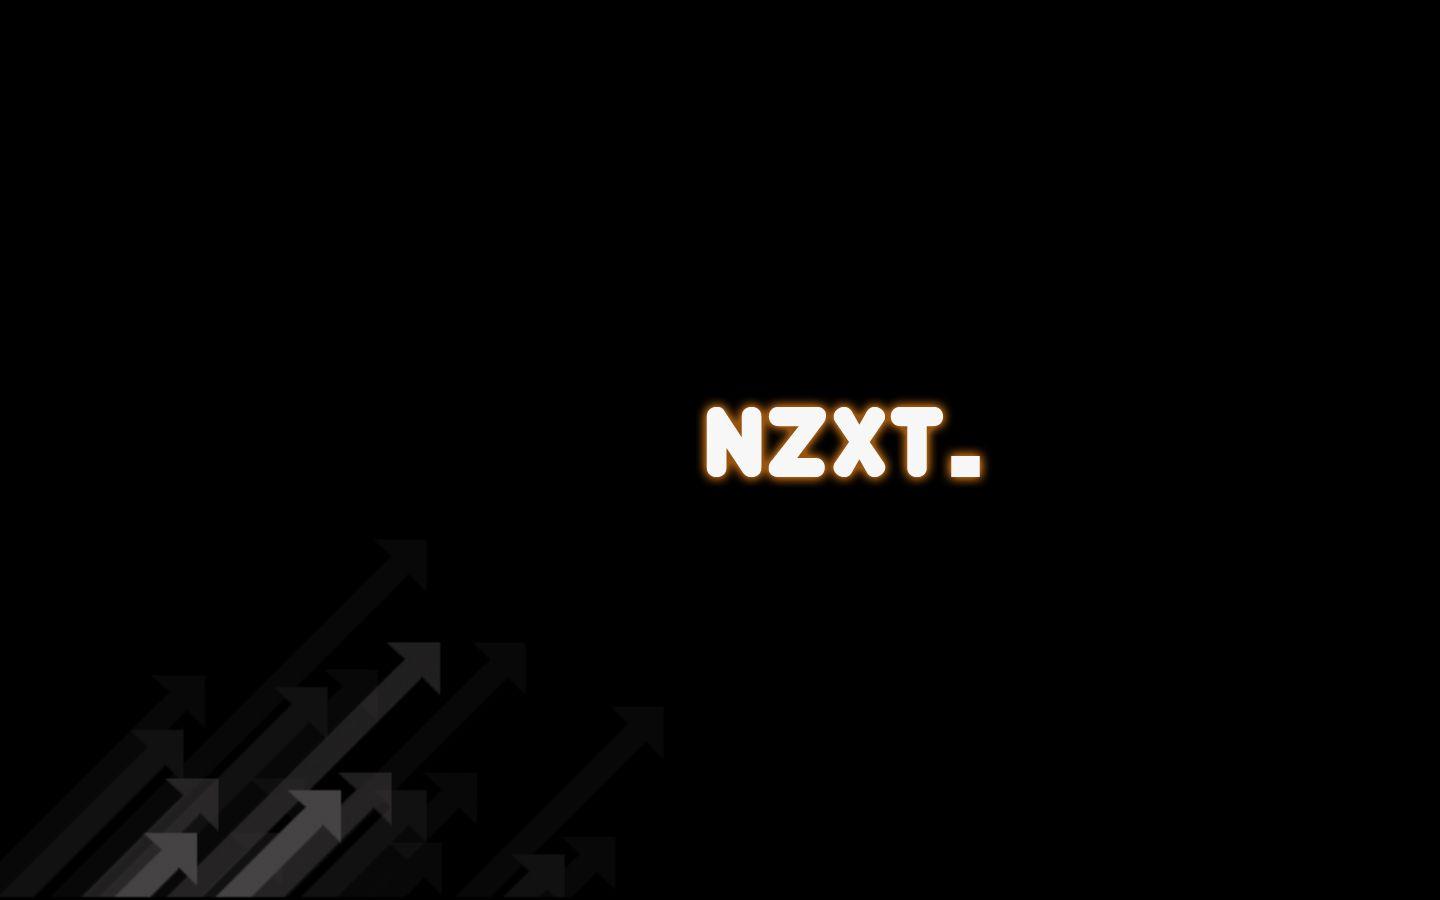 NZXT Wallpapers - Wallpaper Cave.